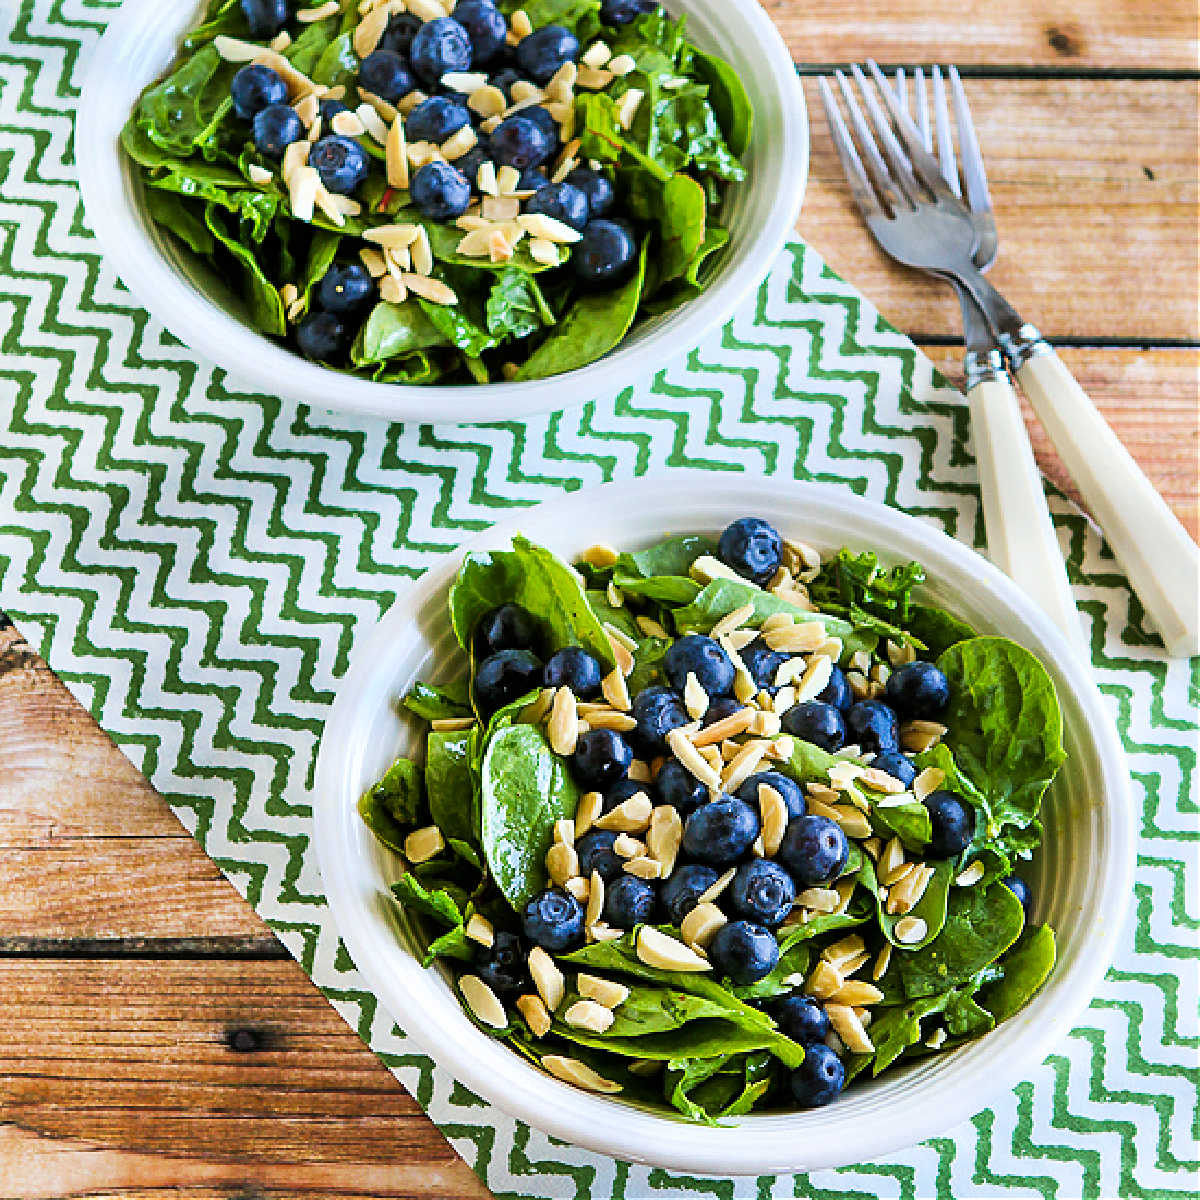 Square image of Power Greens Salad with Blueberries in two serving bowls.